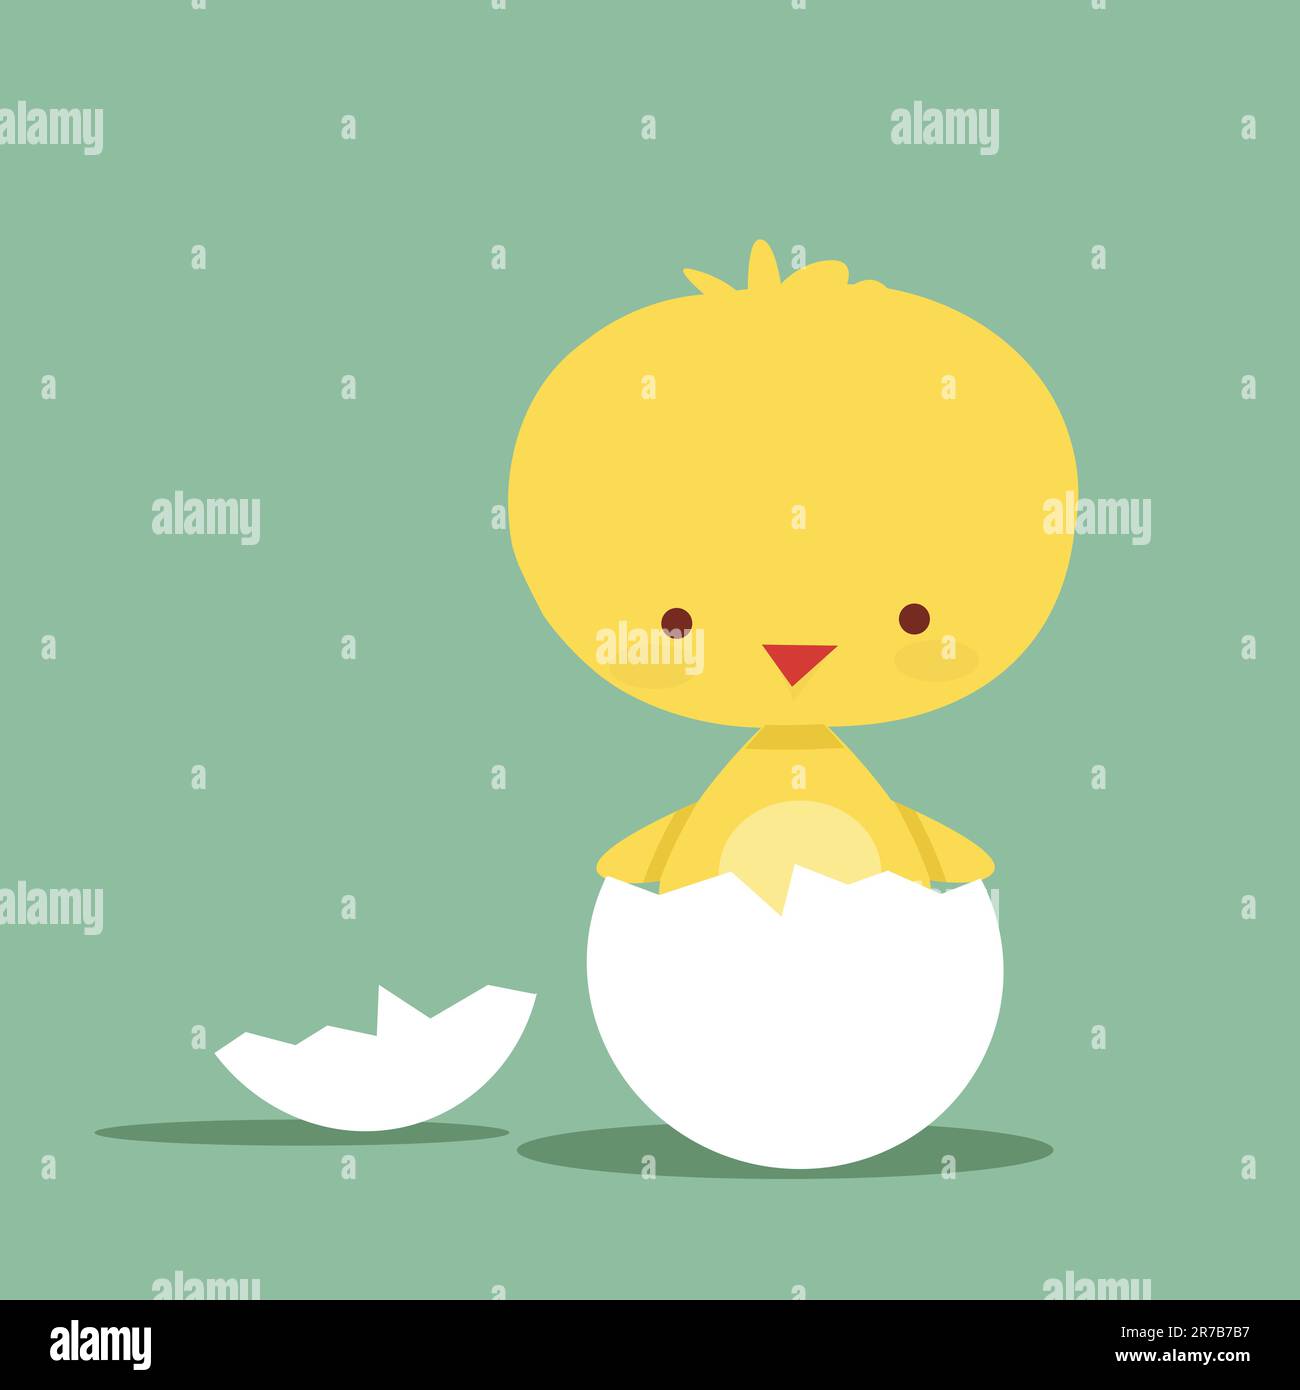 Golden Eggs In Birds Nest PNG Transparent And Clipart Image For Free  Download - Lovepik